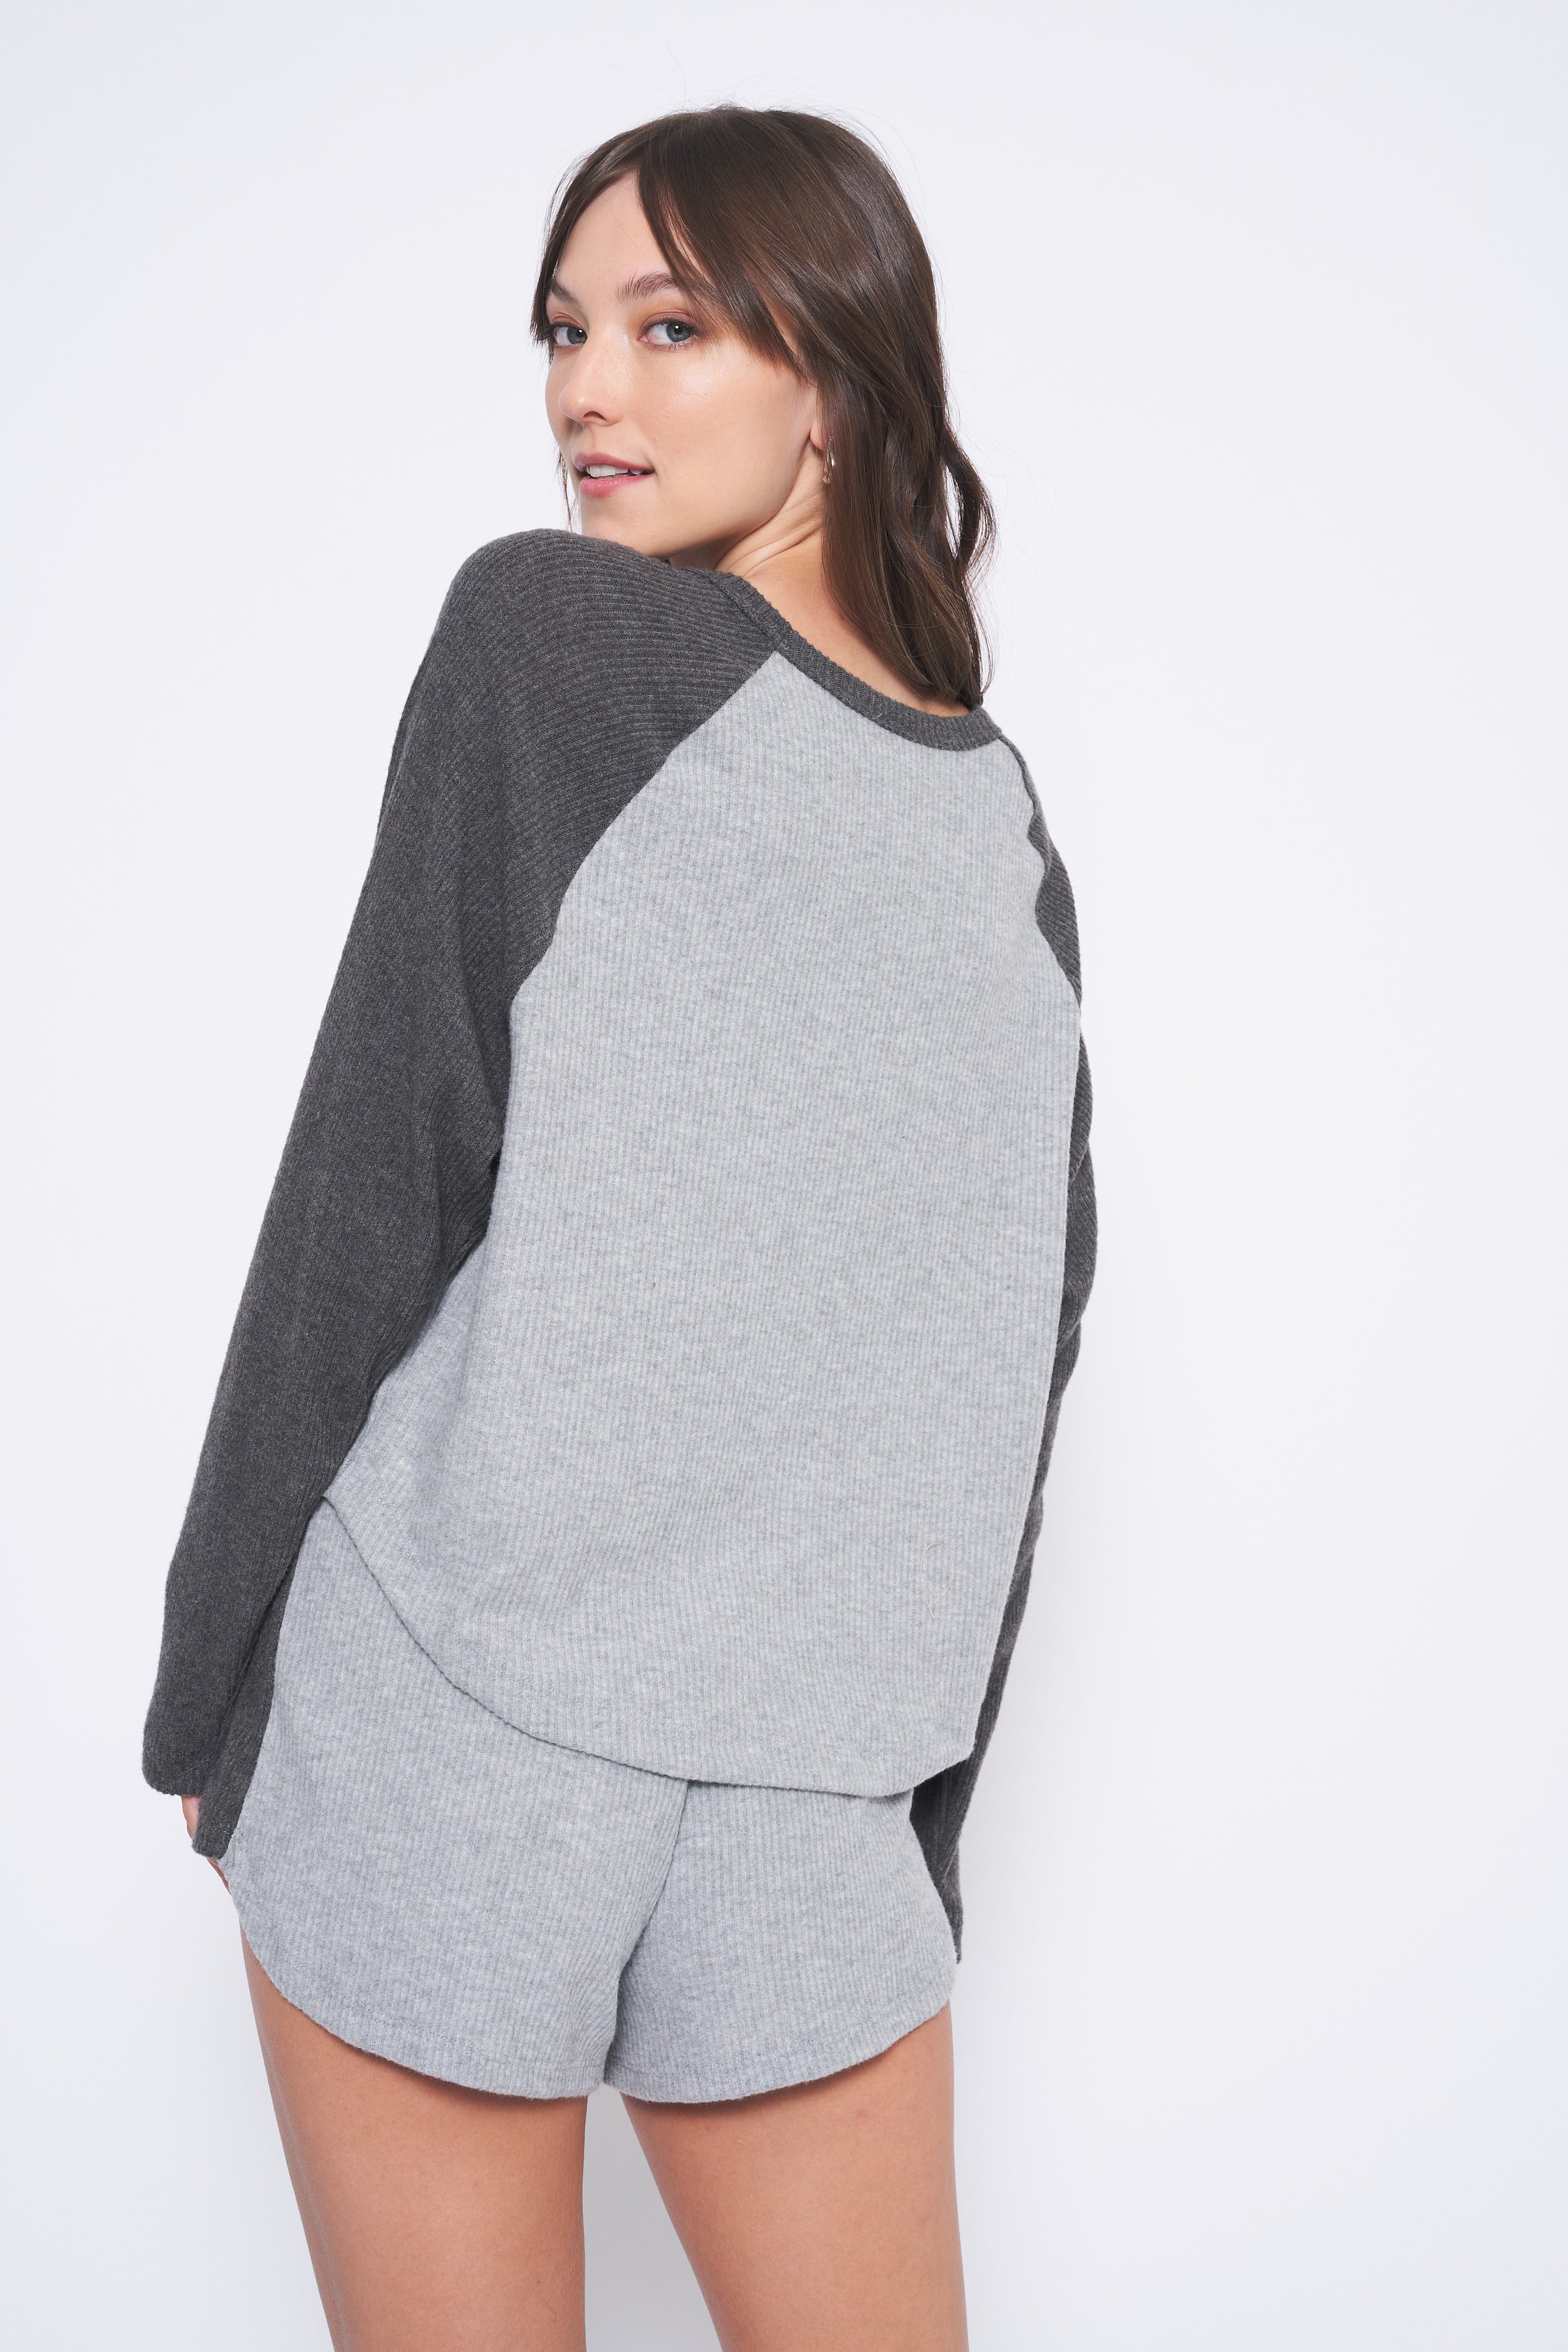 Bases Loaded Color Block Cozy Top